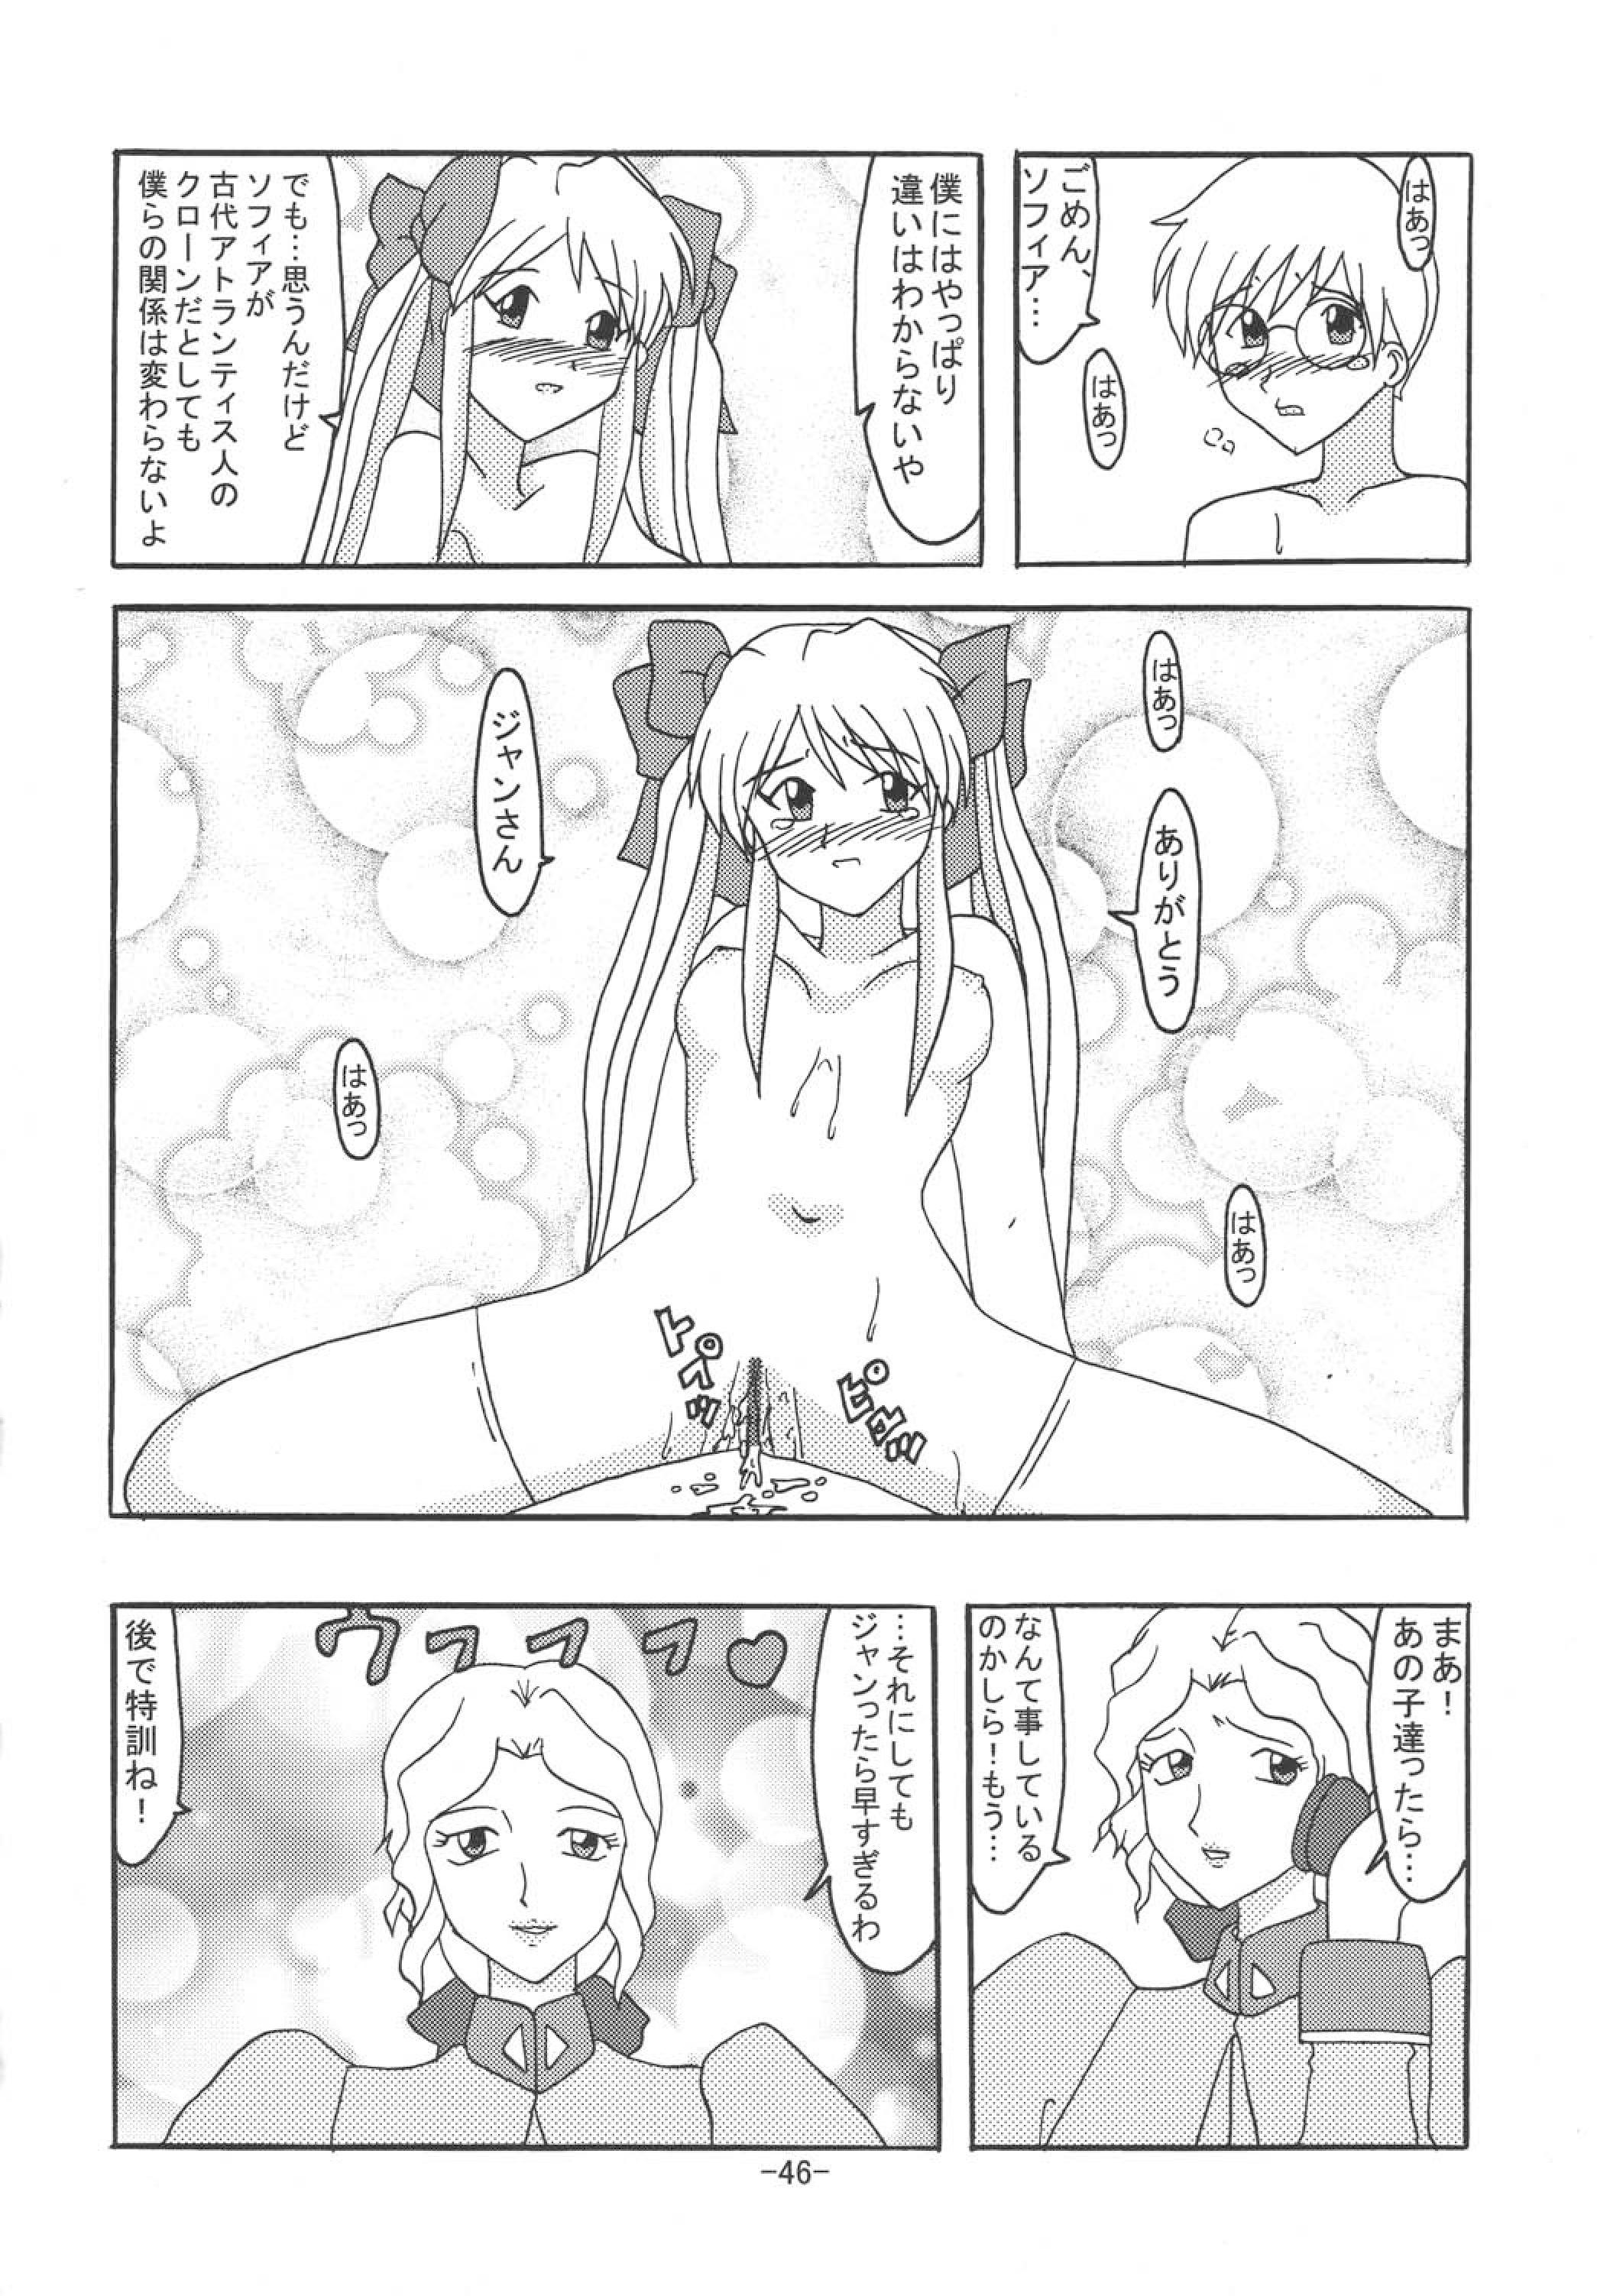 Hungarian THE LEGEND OF BLUE WATER SIDE 4 - Fushigi no umi no nadia Inherit the bluewater Double - Page 45